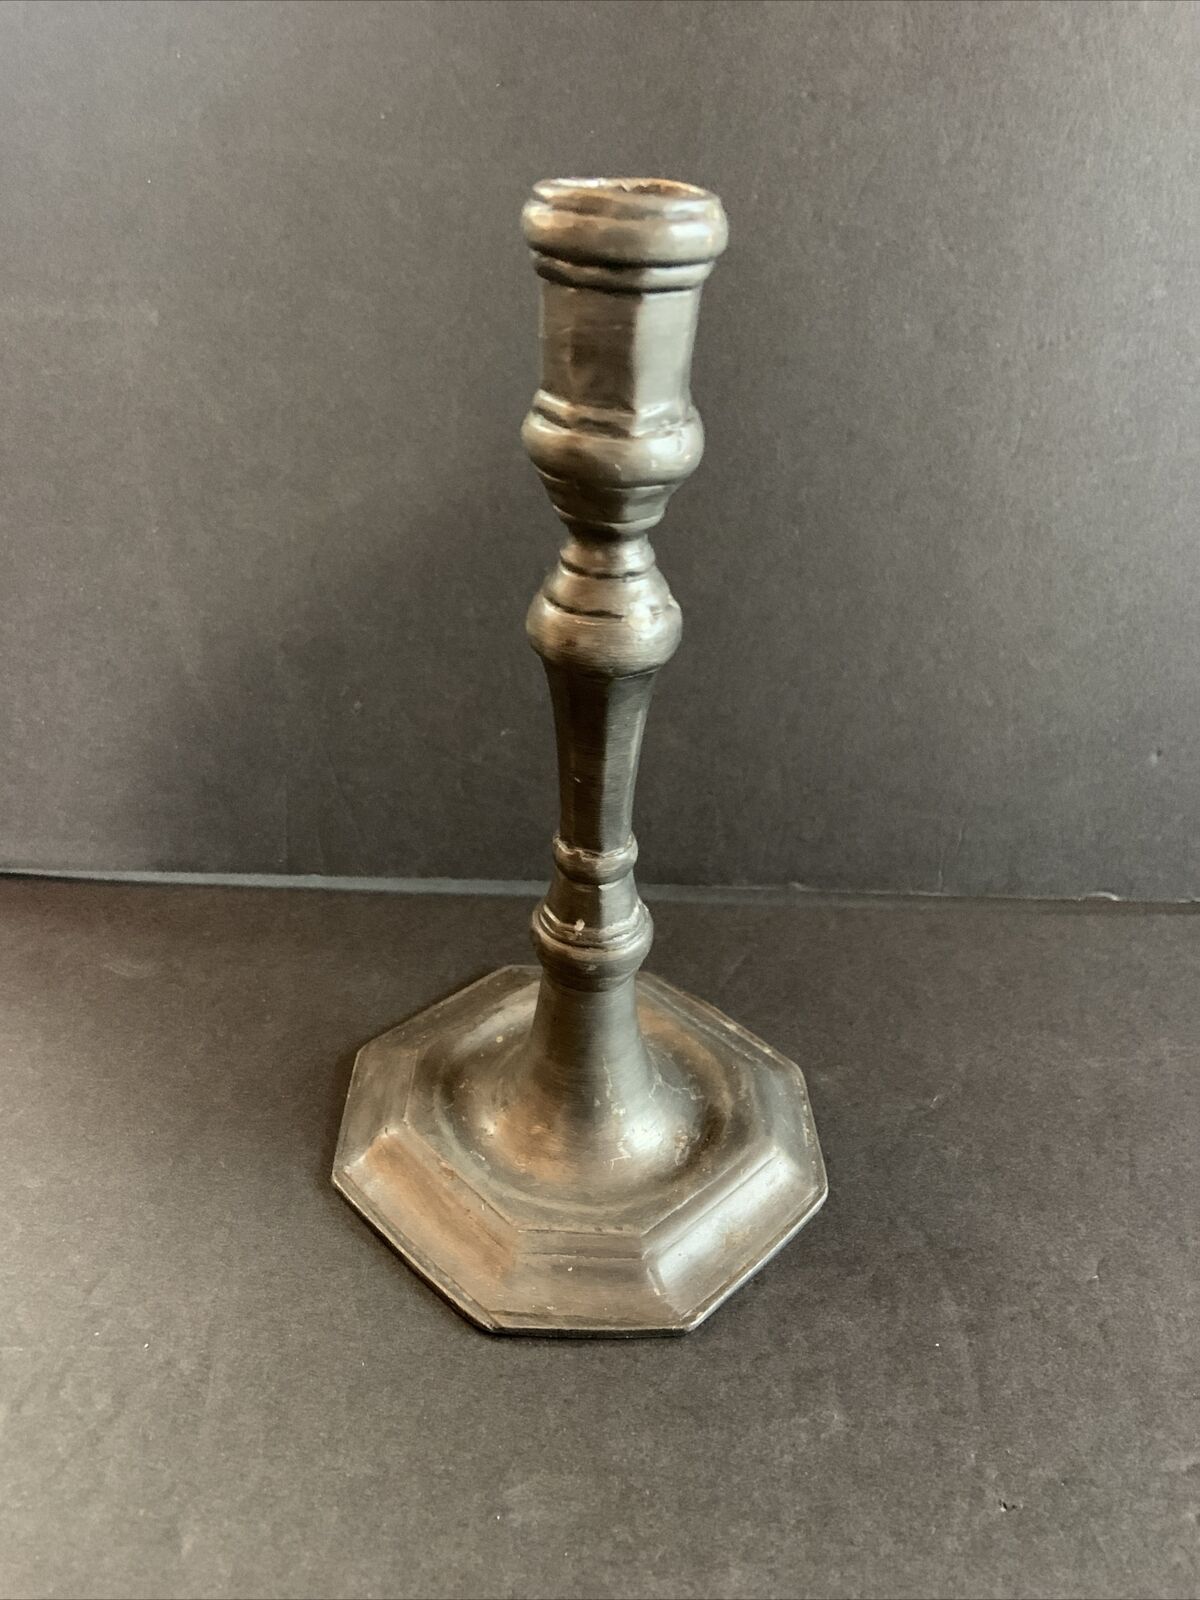 An Antique Early To Mid 18th Century Pewter Taper Candlestick, 7 1/2” Tall